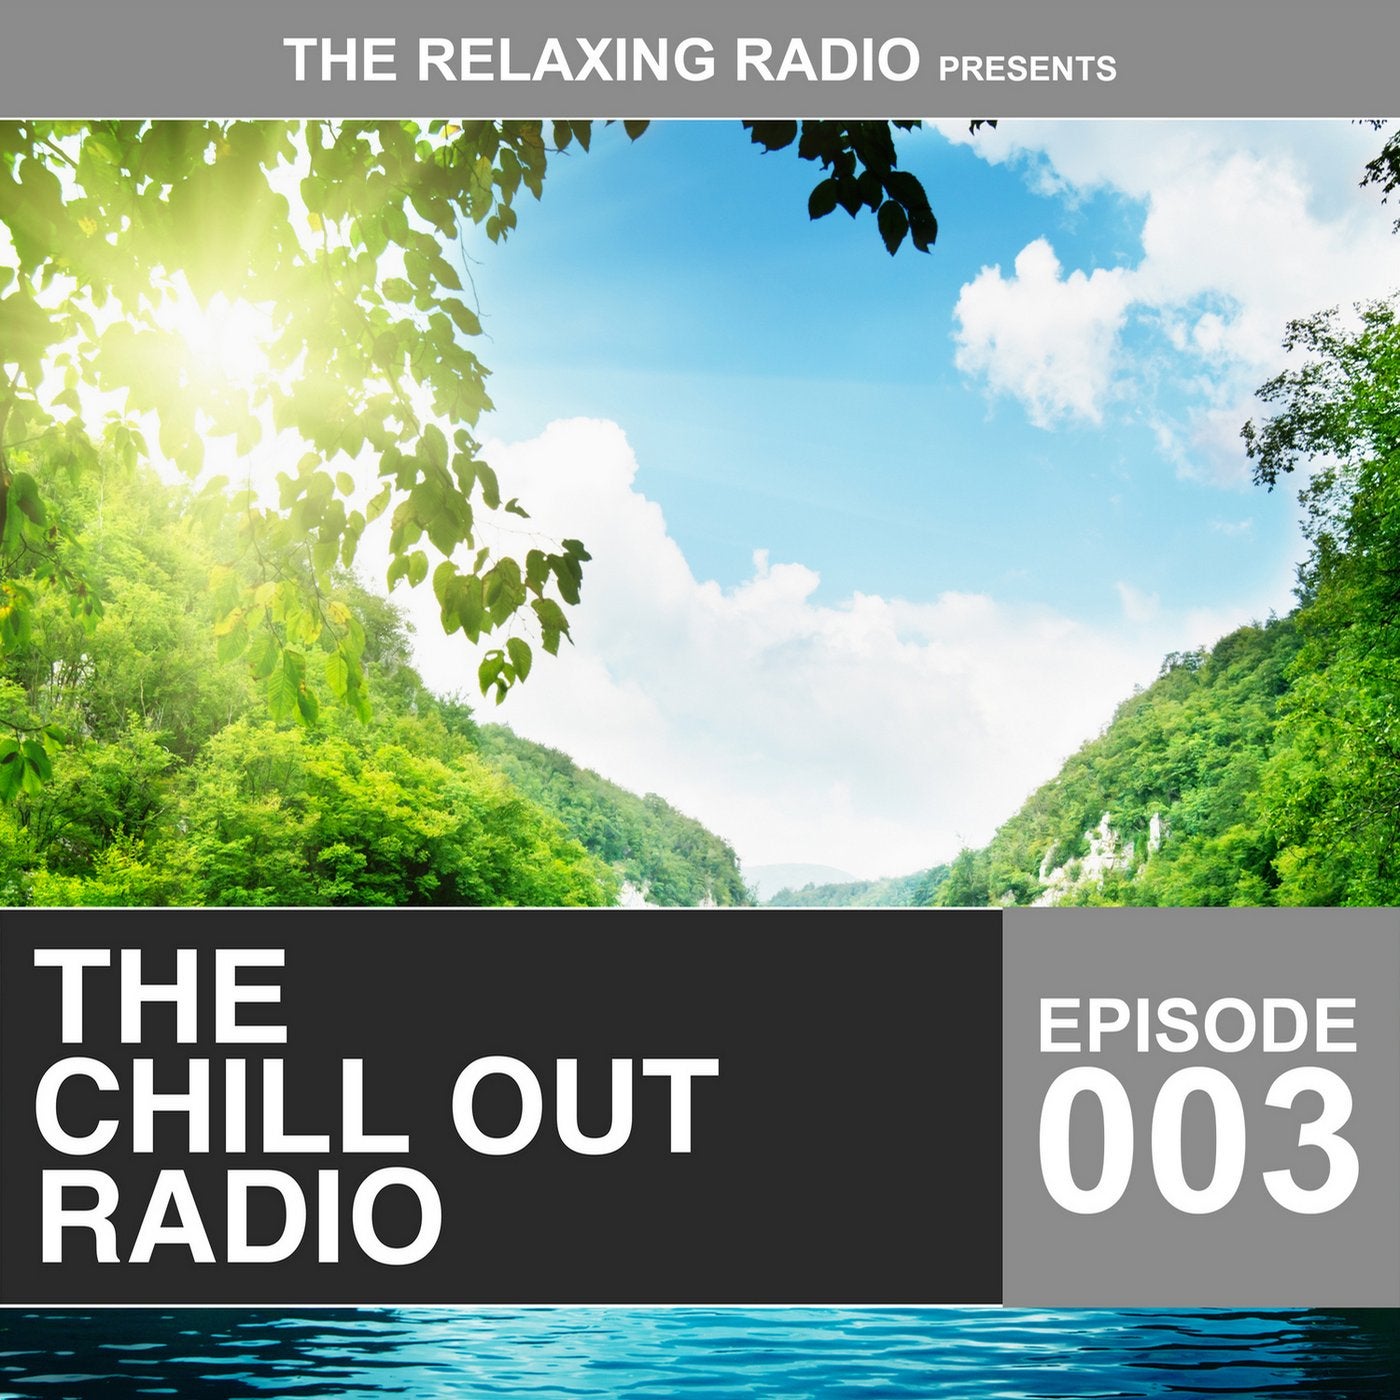 The Chill out Radio - Episode 003